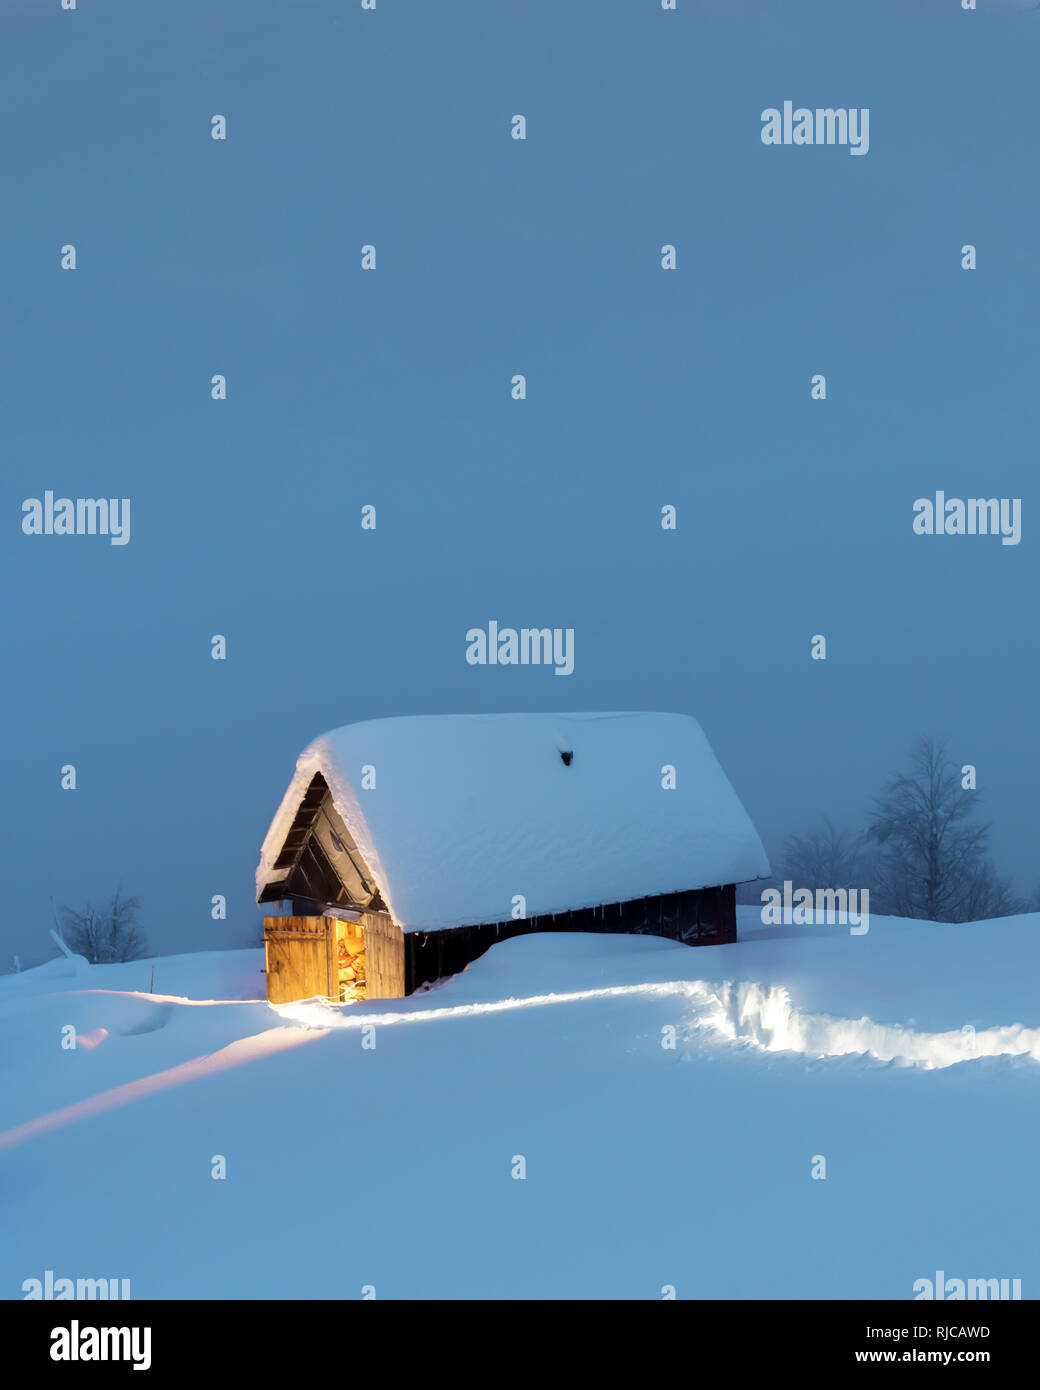 Fantastic winter landscape with wooden house in snowy mountains. Christmas holiday concept Stock Photo